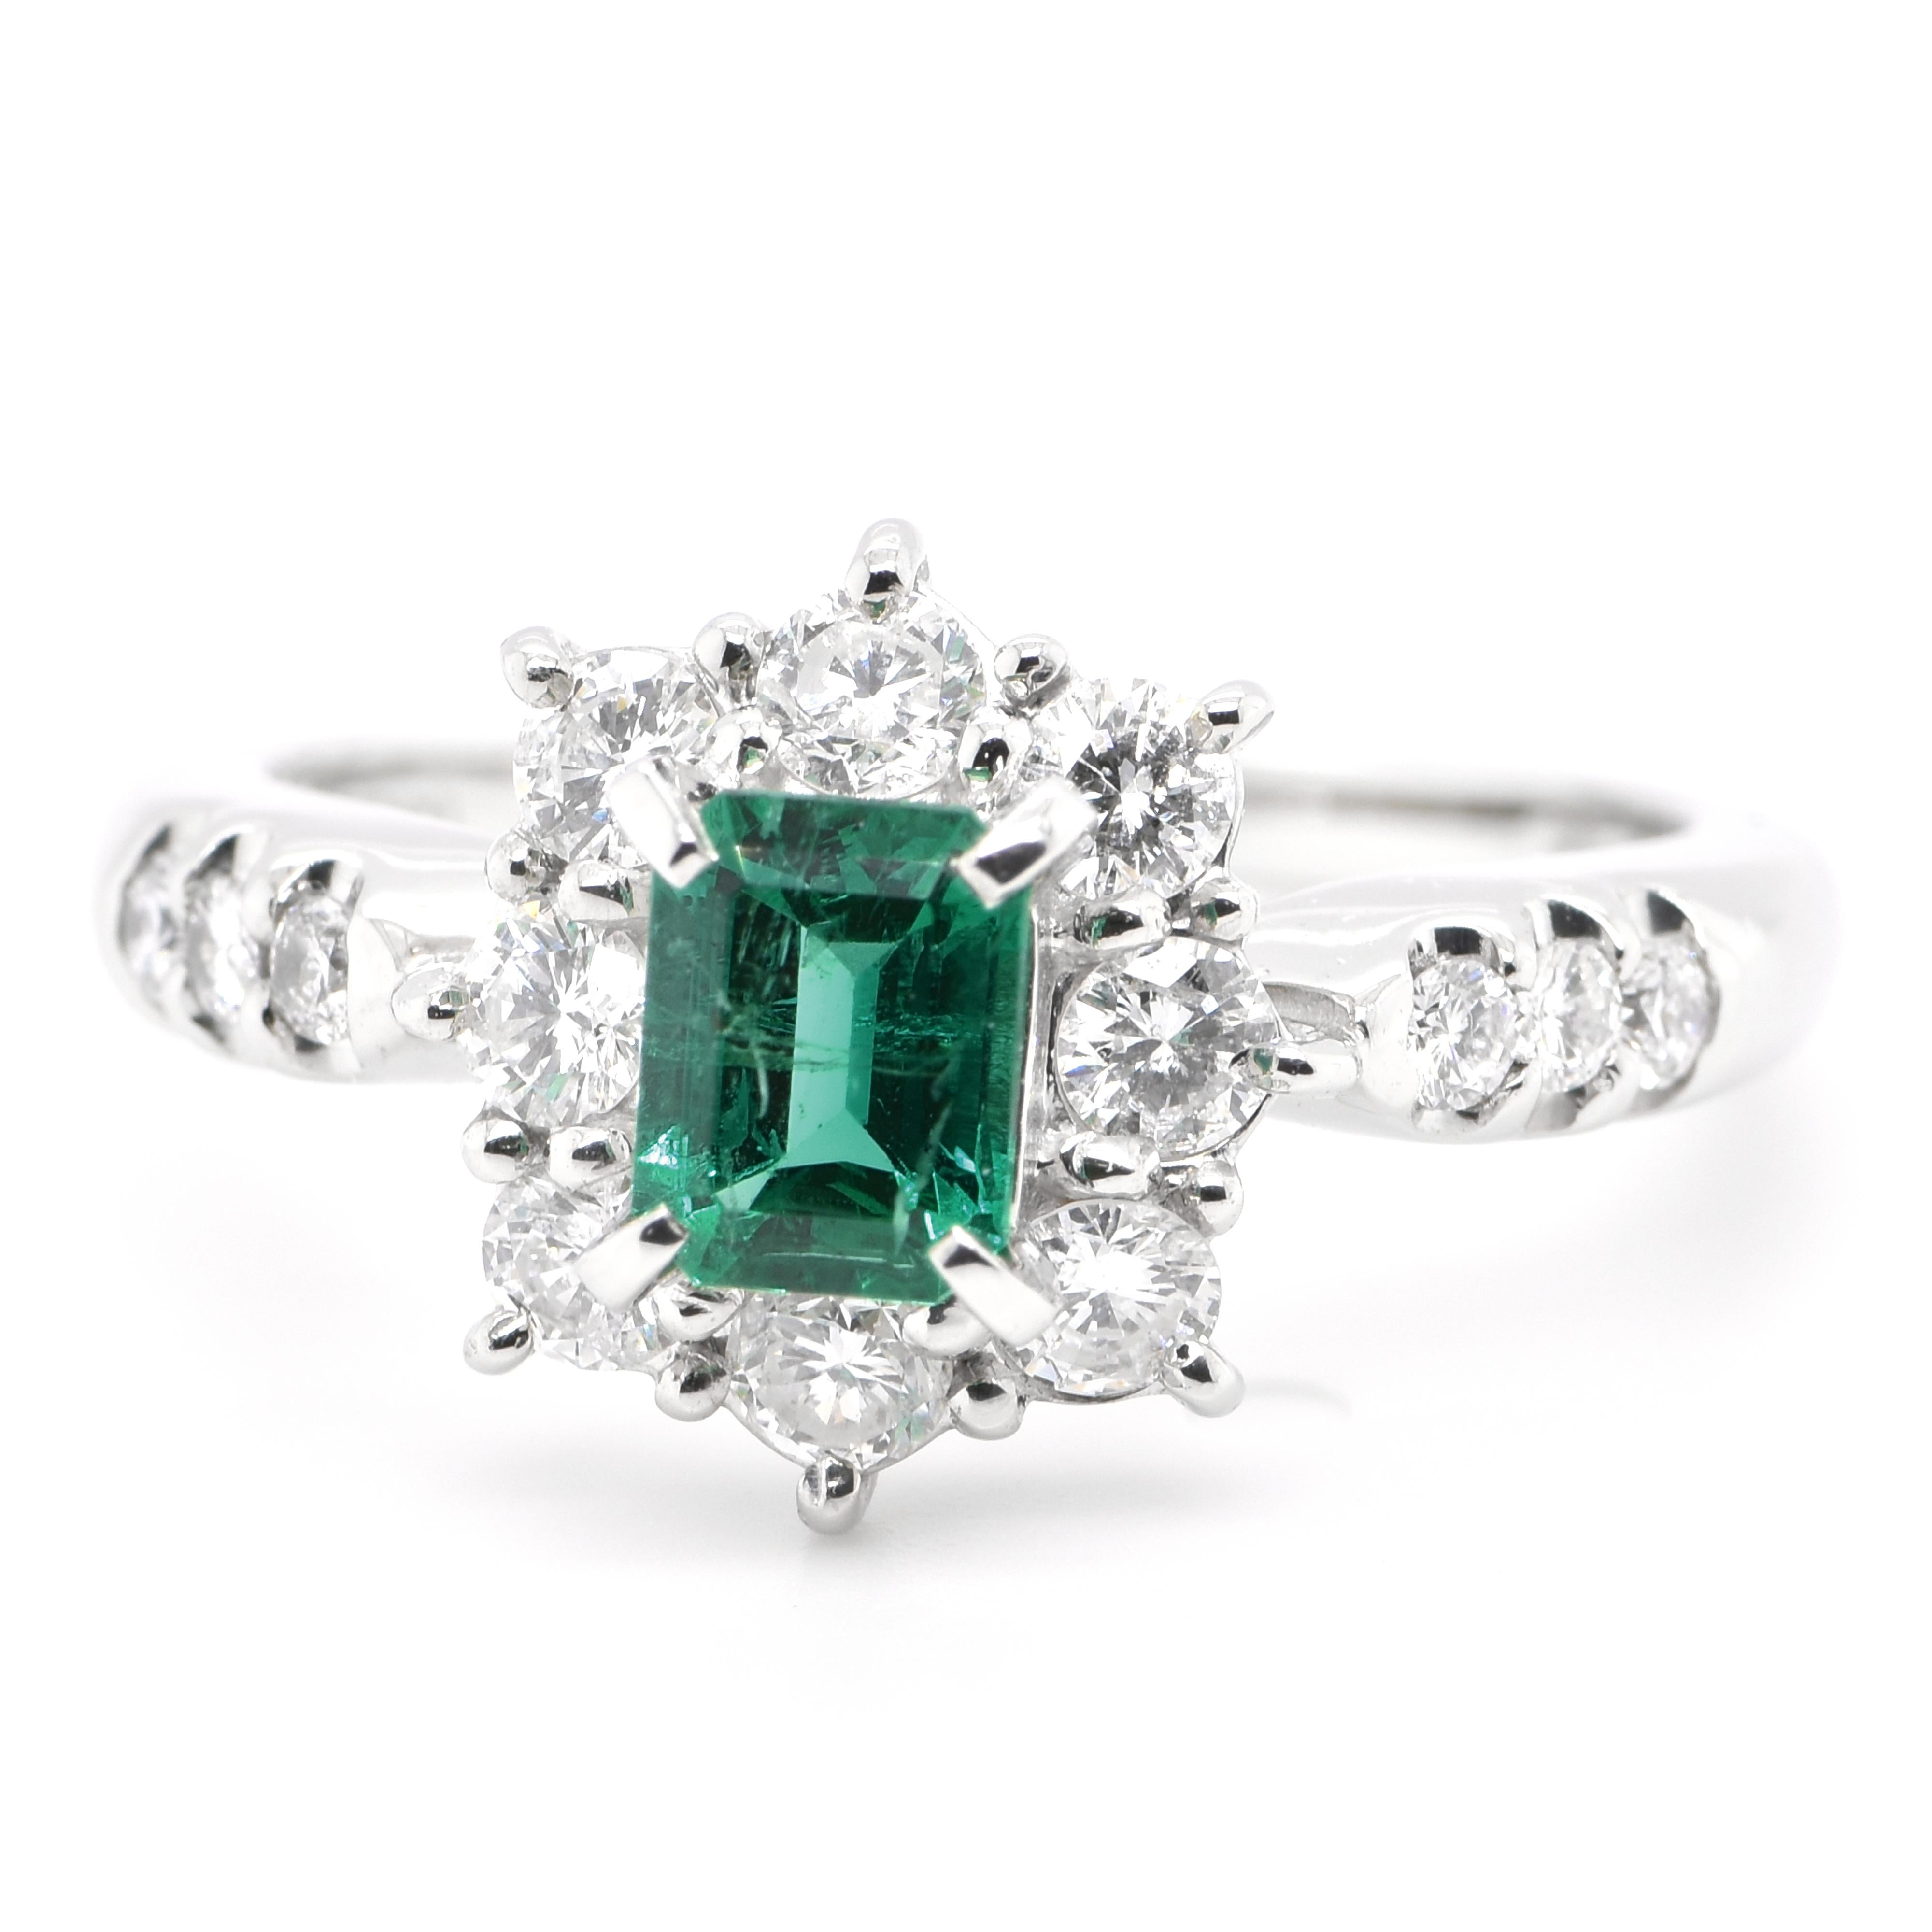 A stunning ring featuring a 0.61 Carat Natural Emerald and 0.61 Carats of Diamond Accents set in Platinum. People have admired emerald’s green for thousands of years. Emeralds have always been associated with the lushest landscapes and the richest